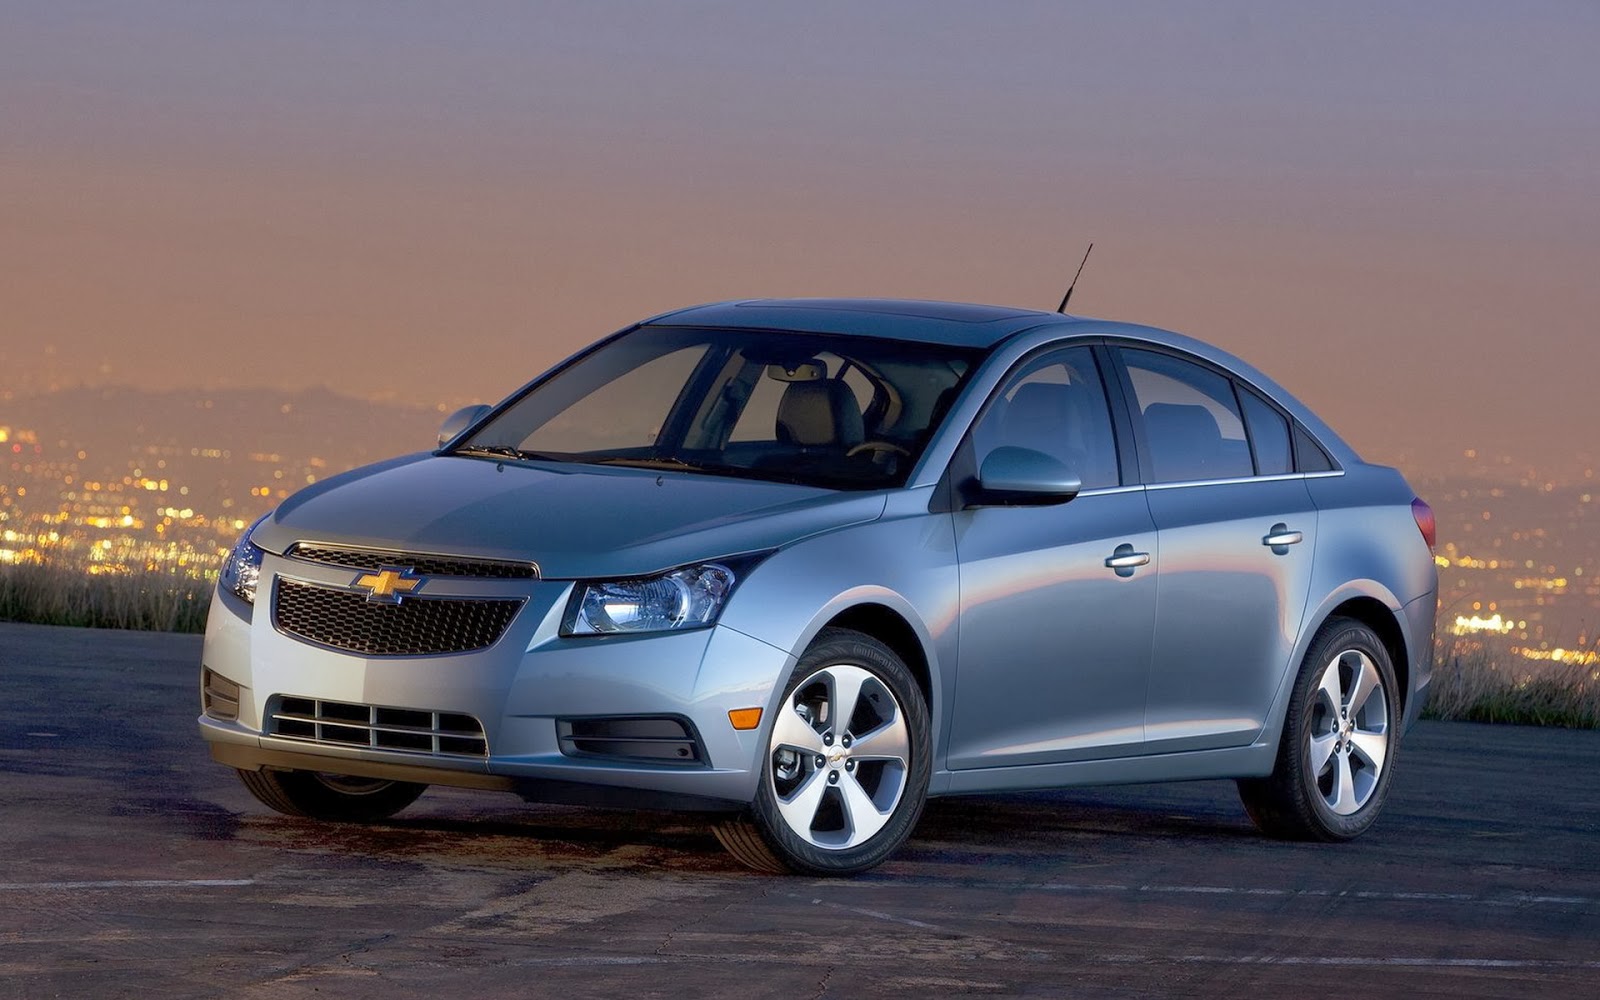 http://www.crazywallpapers.in/2014/03/chevrolet-cruze-hd-wide-pictures.html